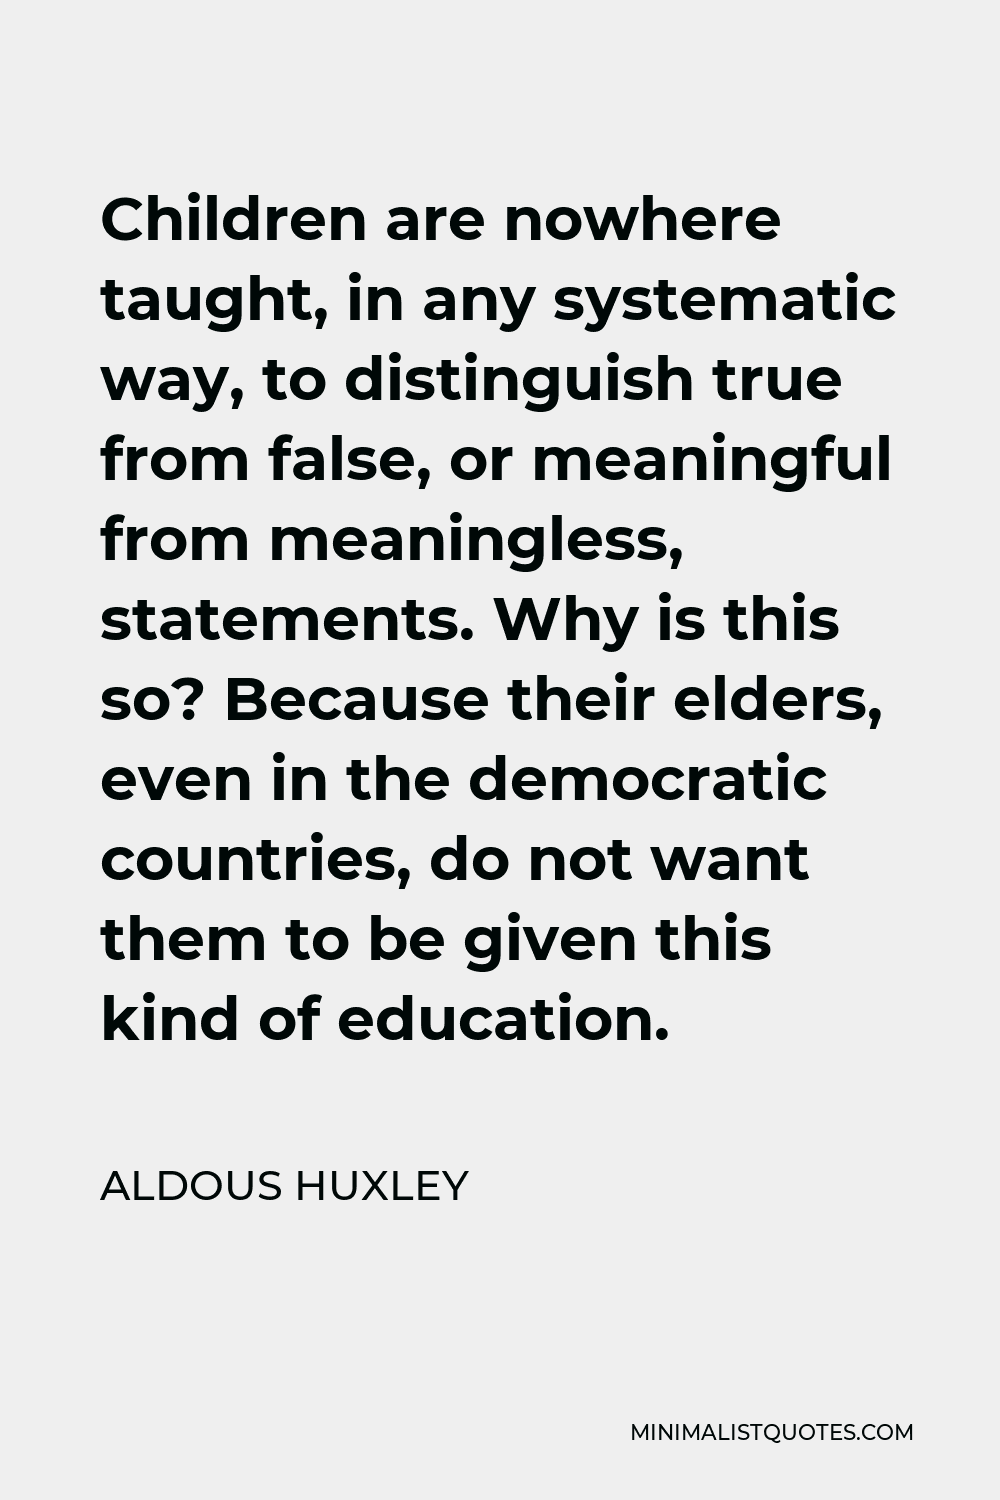 Aldous Huxley Quote - Children are nowhere taught, in any systematic way, to distinguish true from false, or meaningful from meaningless, statements. Why is this so? Because their elders, even in the democratic countries, do not want them to be given this kind of education.